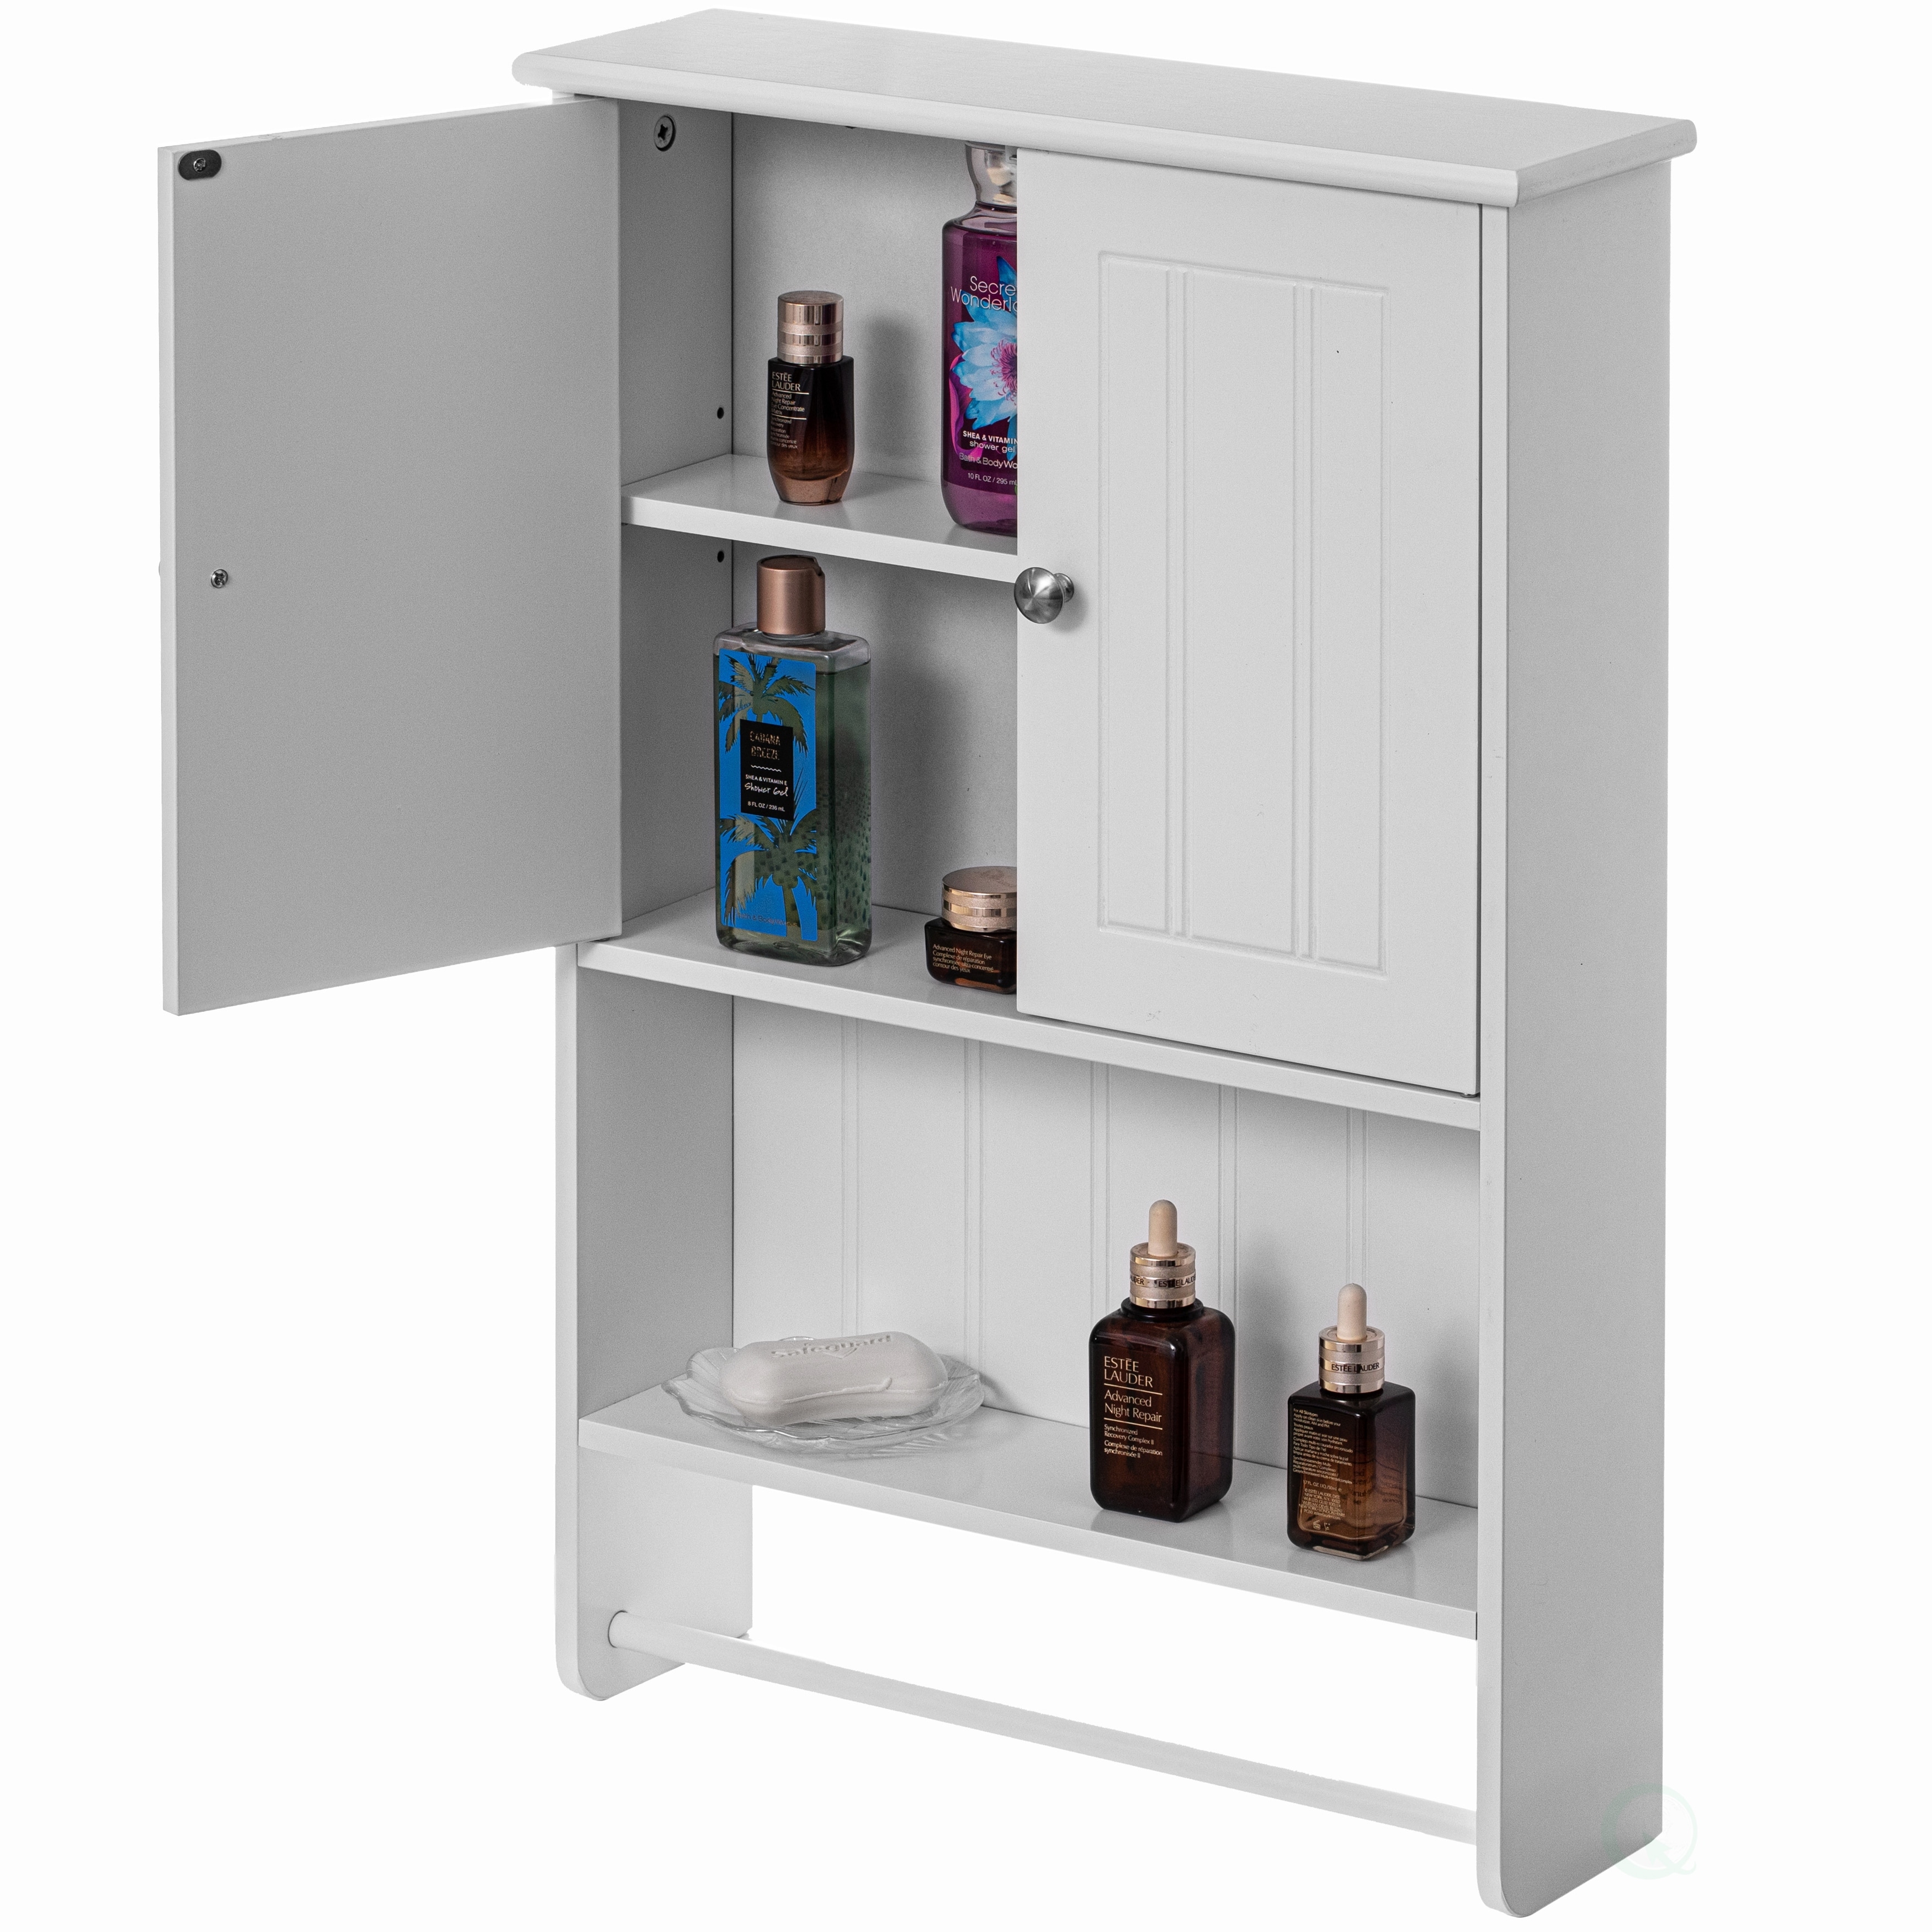 Basicwise Wall Mount Bathroom Mirrored Storage Cabinet With Open Shelf